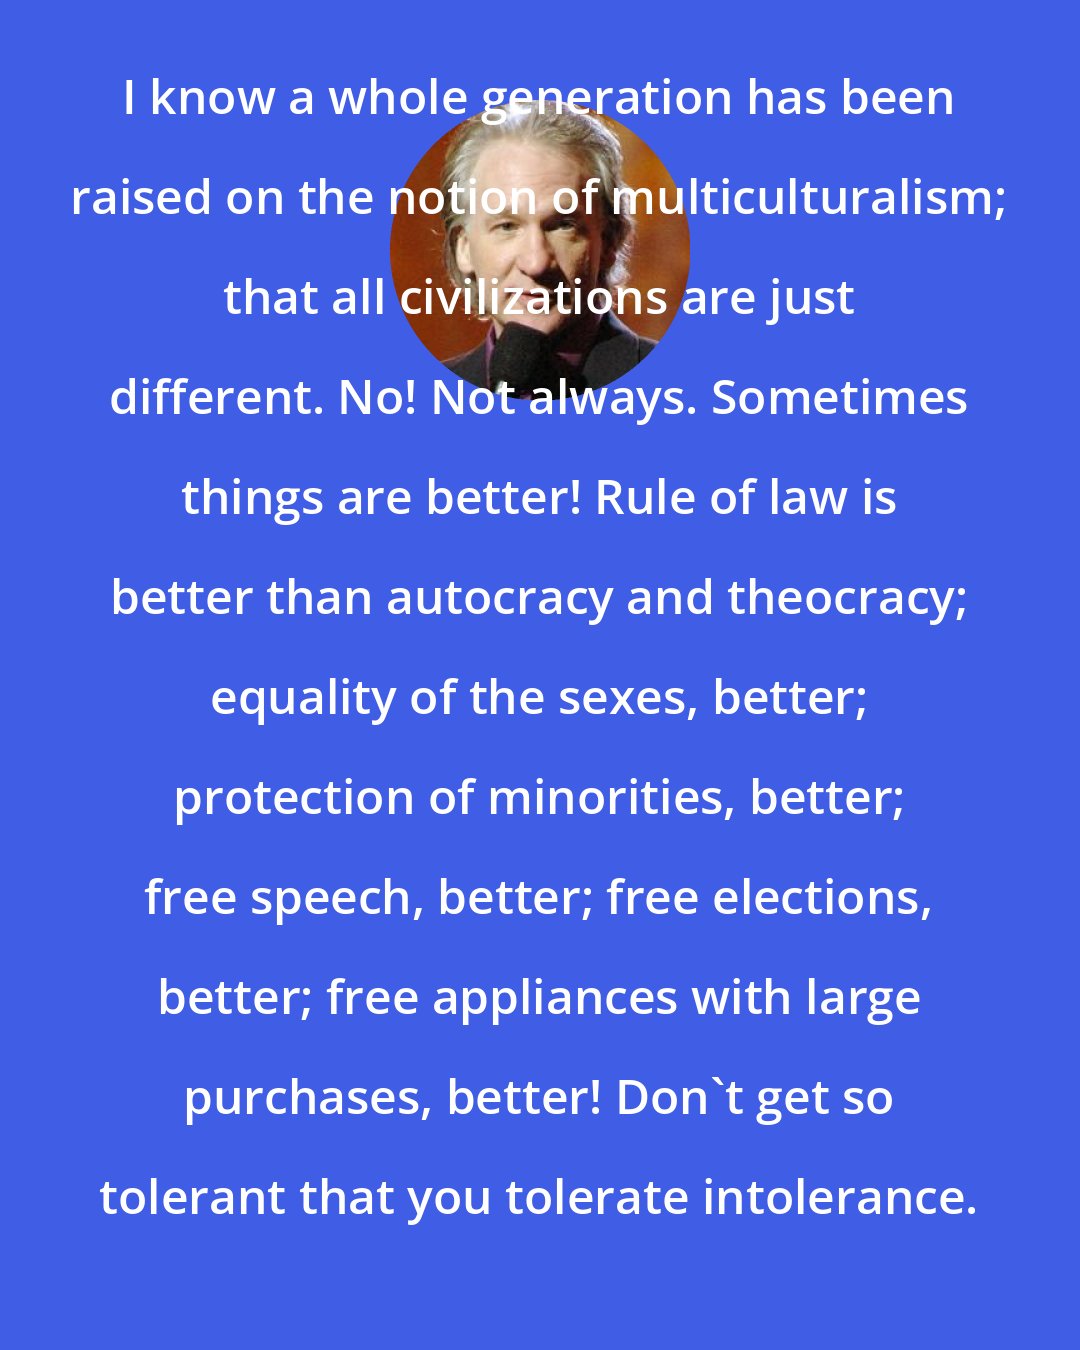 Bill Maher: I know a whole generation has been raised on the notion of multiculturalism; that all civilizations are just different. No! Not always. Sometimes things are better! Rule of law is better than autocracy and theocracy; equality of the sexes, better; protection of minorities, better; free speech, better; free elections, better; free appliances with large purchases, better! Don't get so tolerant that you tolerate intolerance.